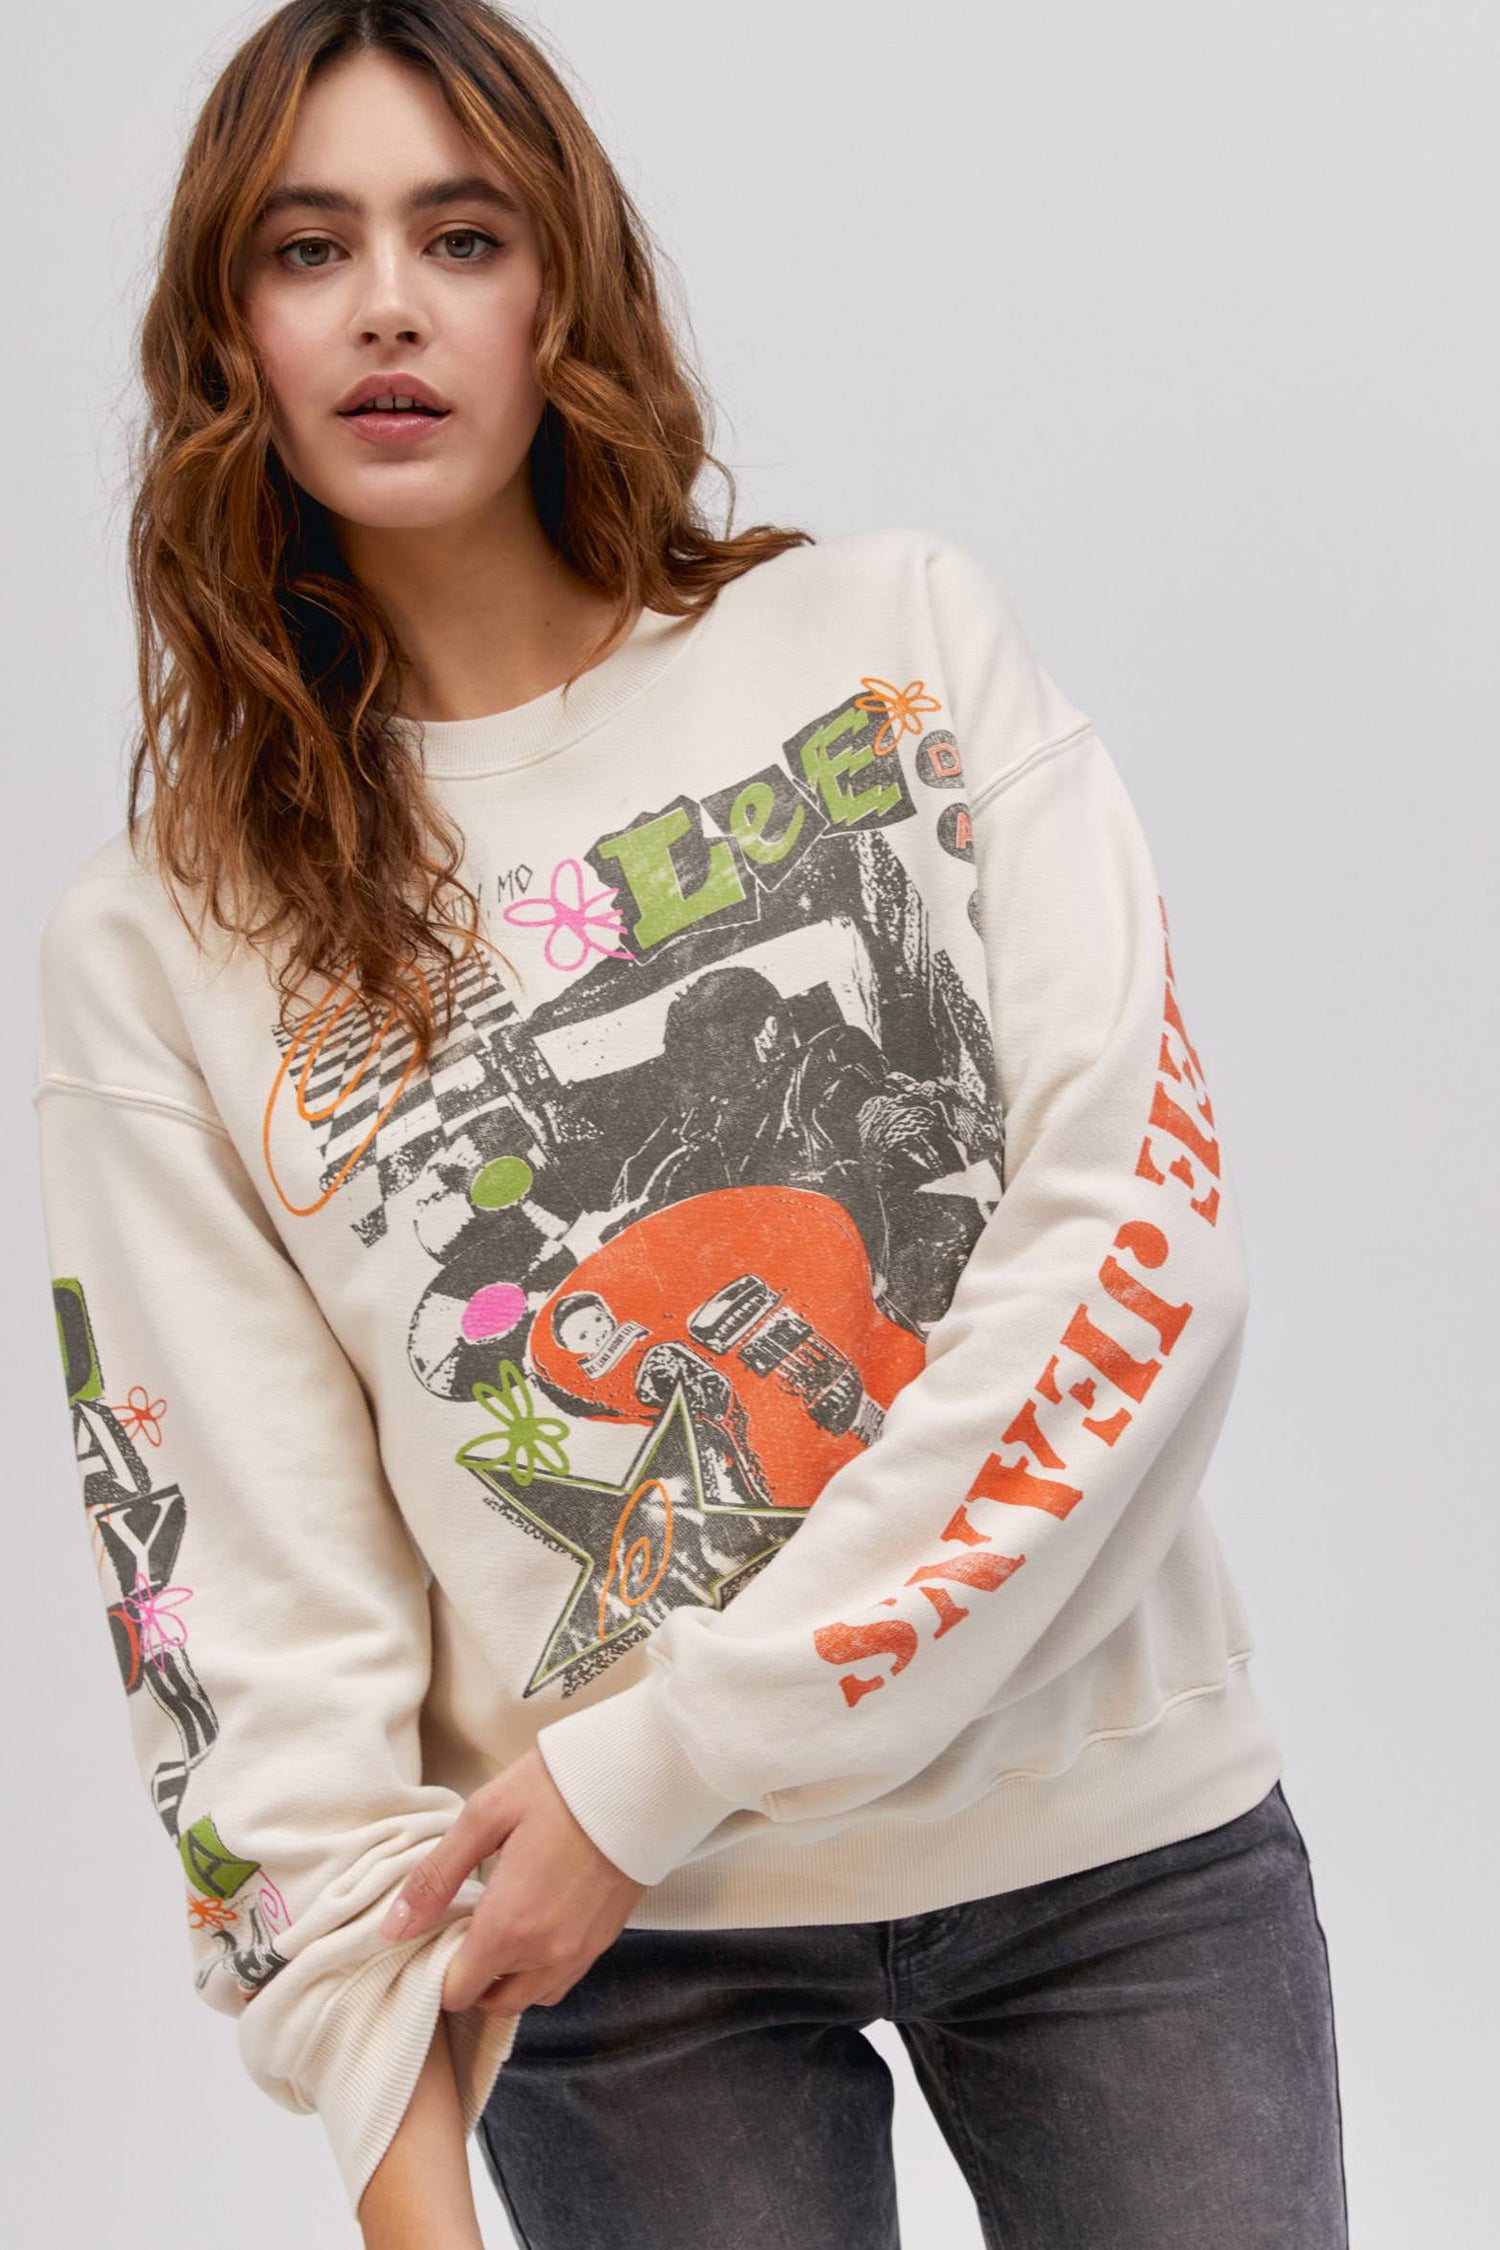 long haired model posing and wearing an off white colored sweatshirt with washed graphics